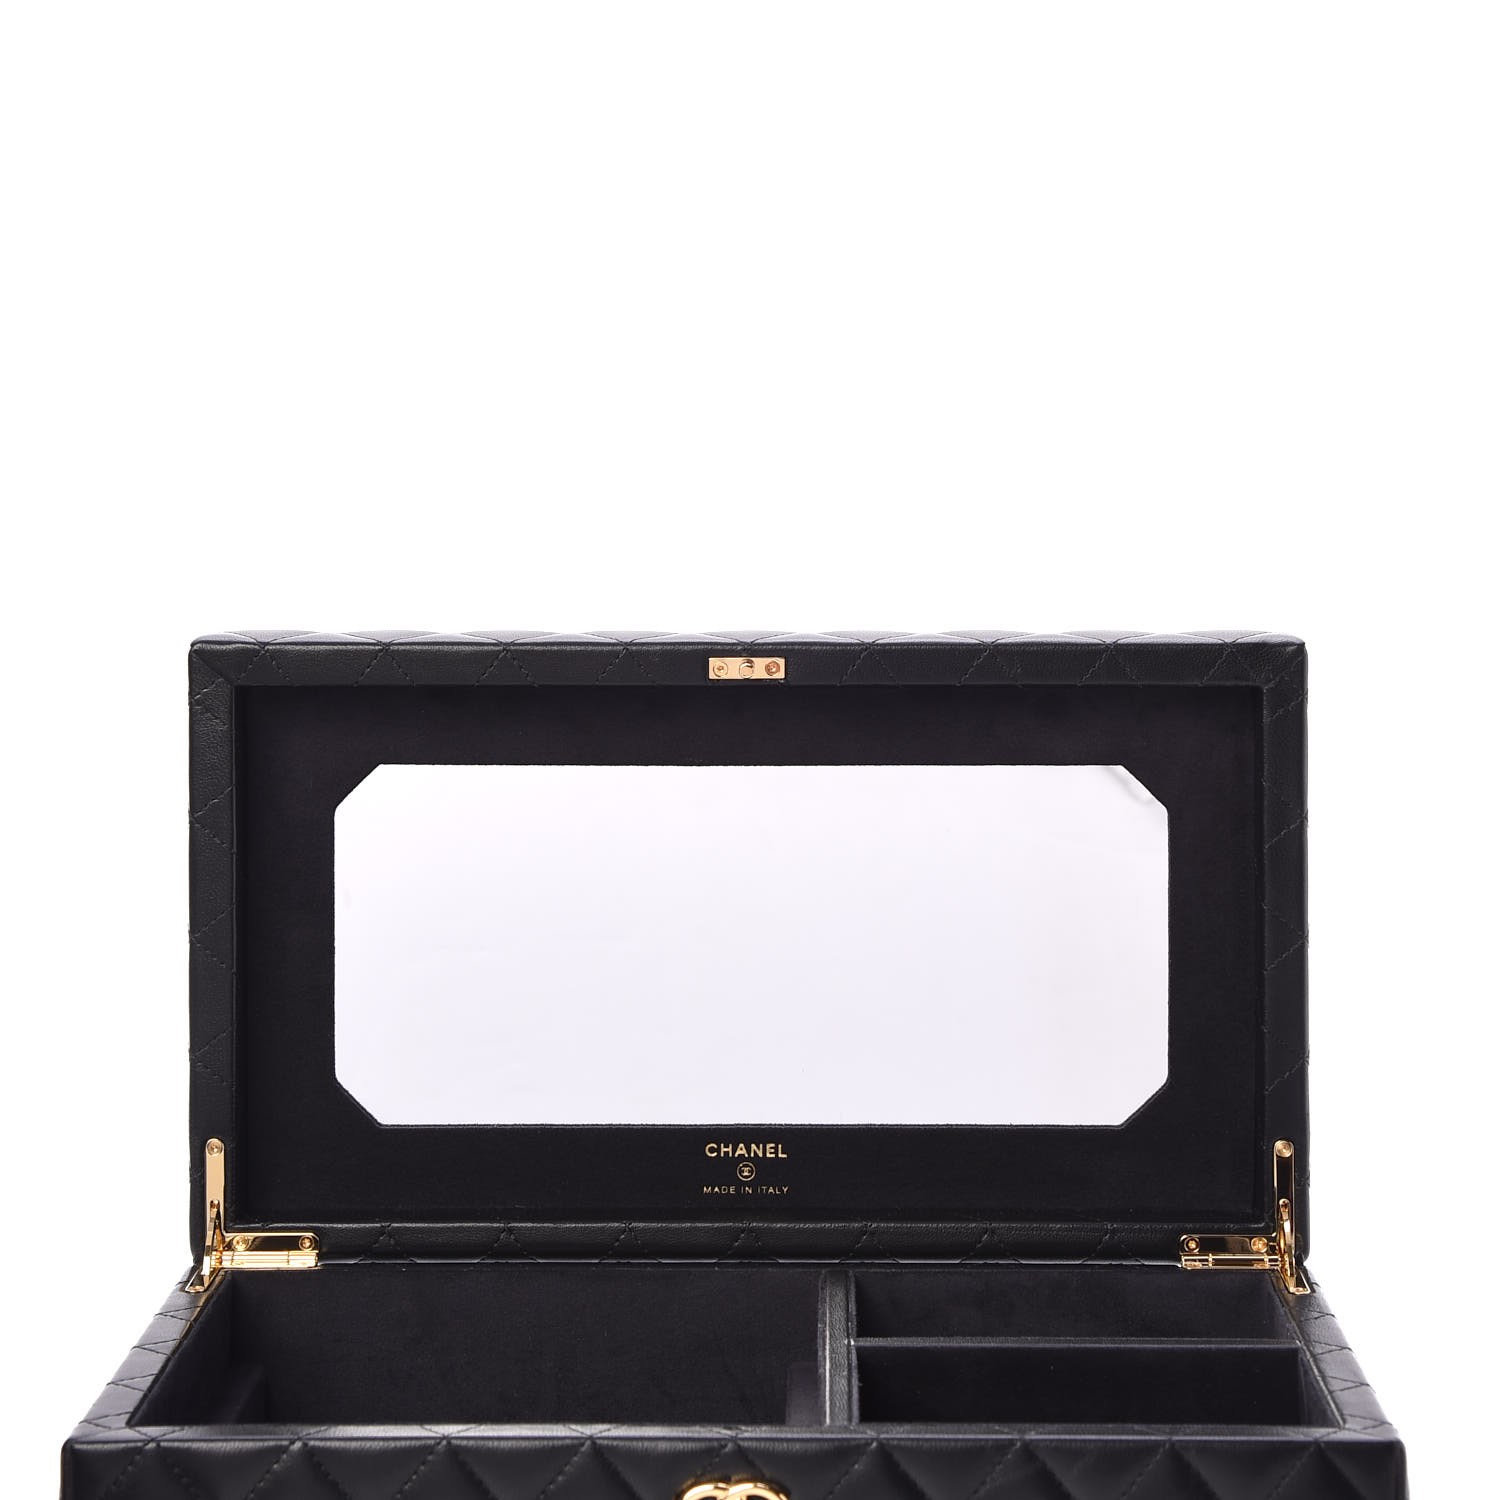 CHANEL Lambskin Quilted Jewelry Case Black 300563